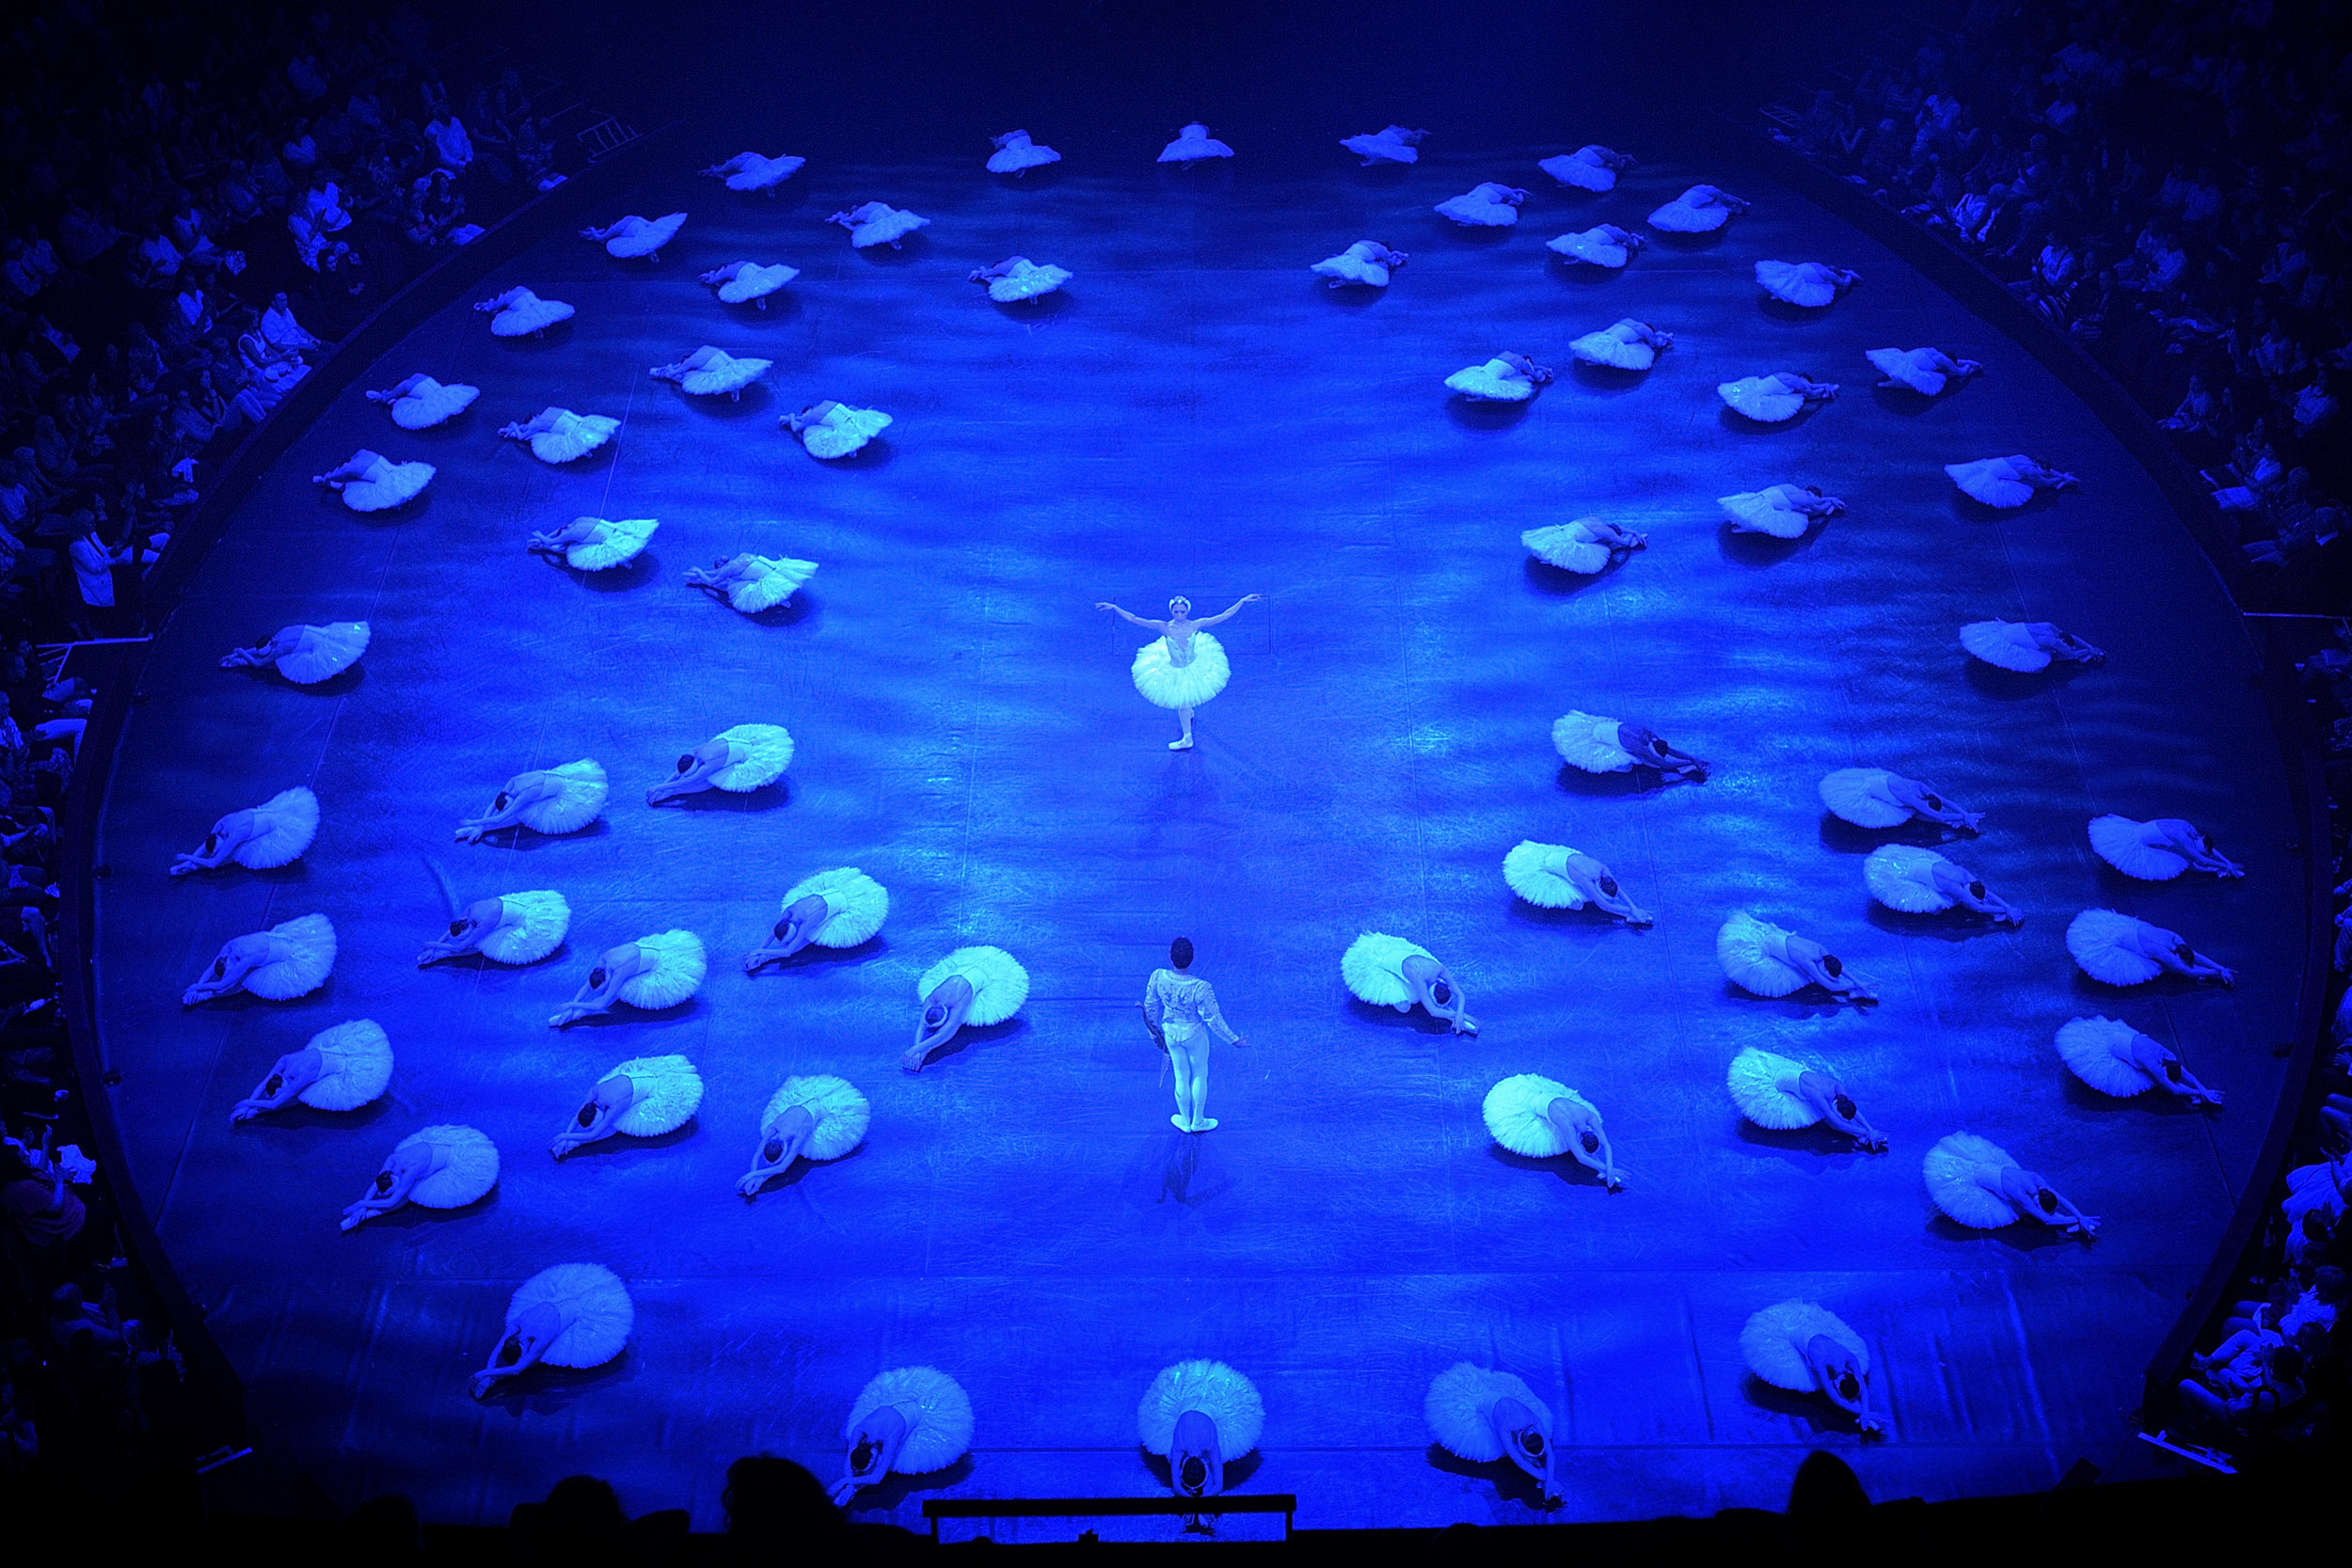 A dancer in the role of Odette from Swan Lake and a dancer in the role of Prince Siegfried are facing each other at the centre of a round stage filled with blue light. Odette is wearing a white tutu and headdress while Siegfried is wearing a white top and white tights. Around them, a large group of dancers playing the white swans are shown laying on the ground in perfect unison, all wearing white tutus.